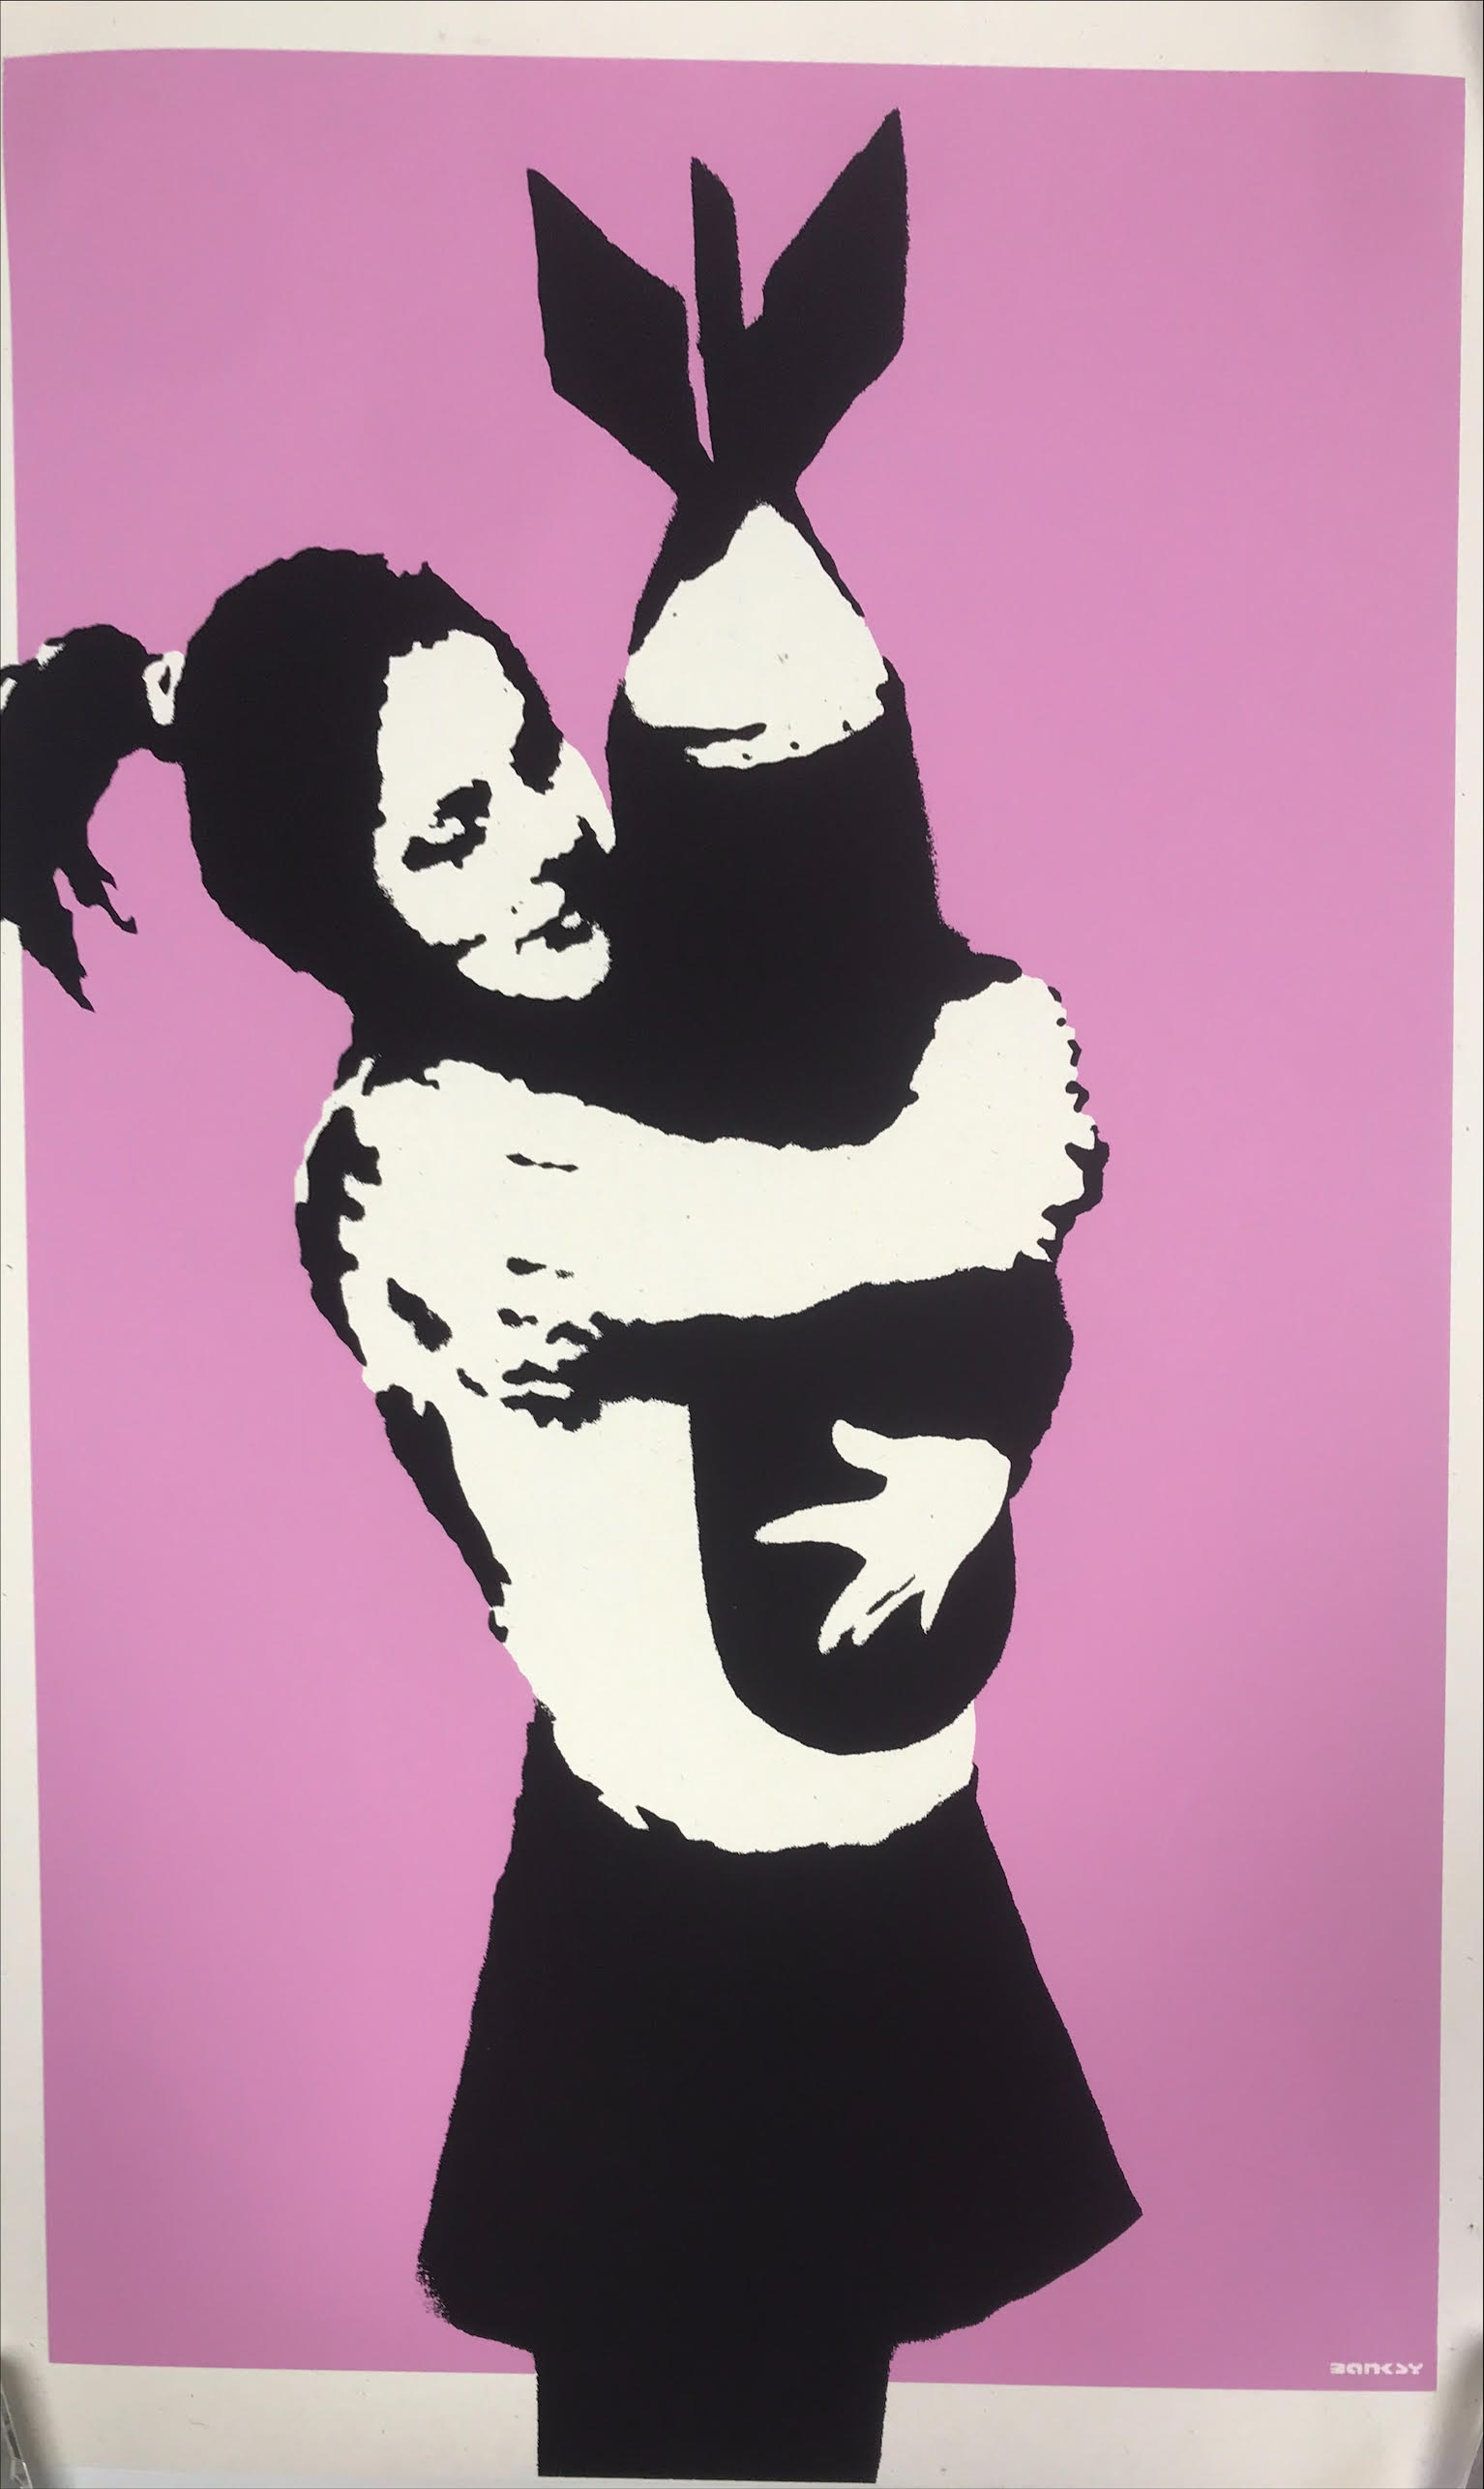 After Banksy, Bomb Hugger. Limited edition numbered print by West Country Prince